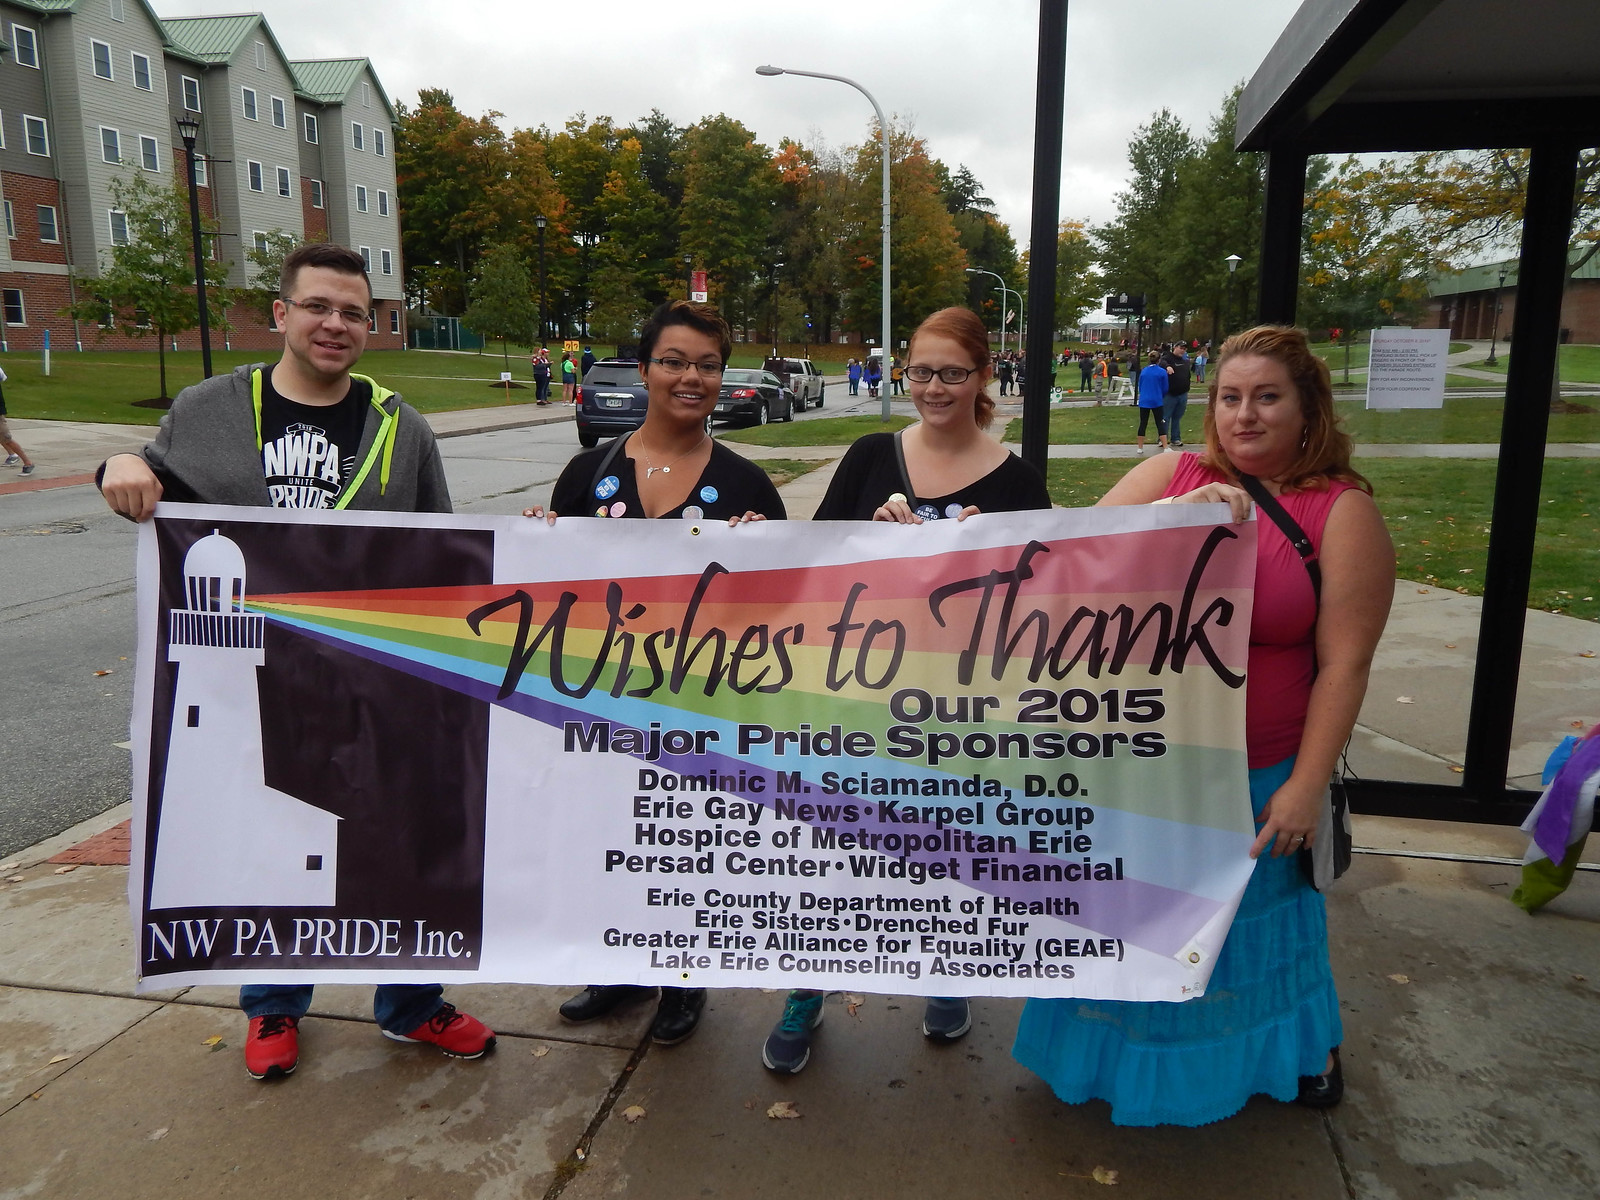 NW PA Pride Alliance board members and Identity members with NWPAPA banner